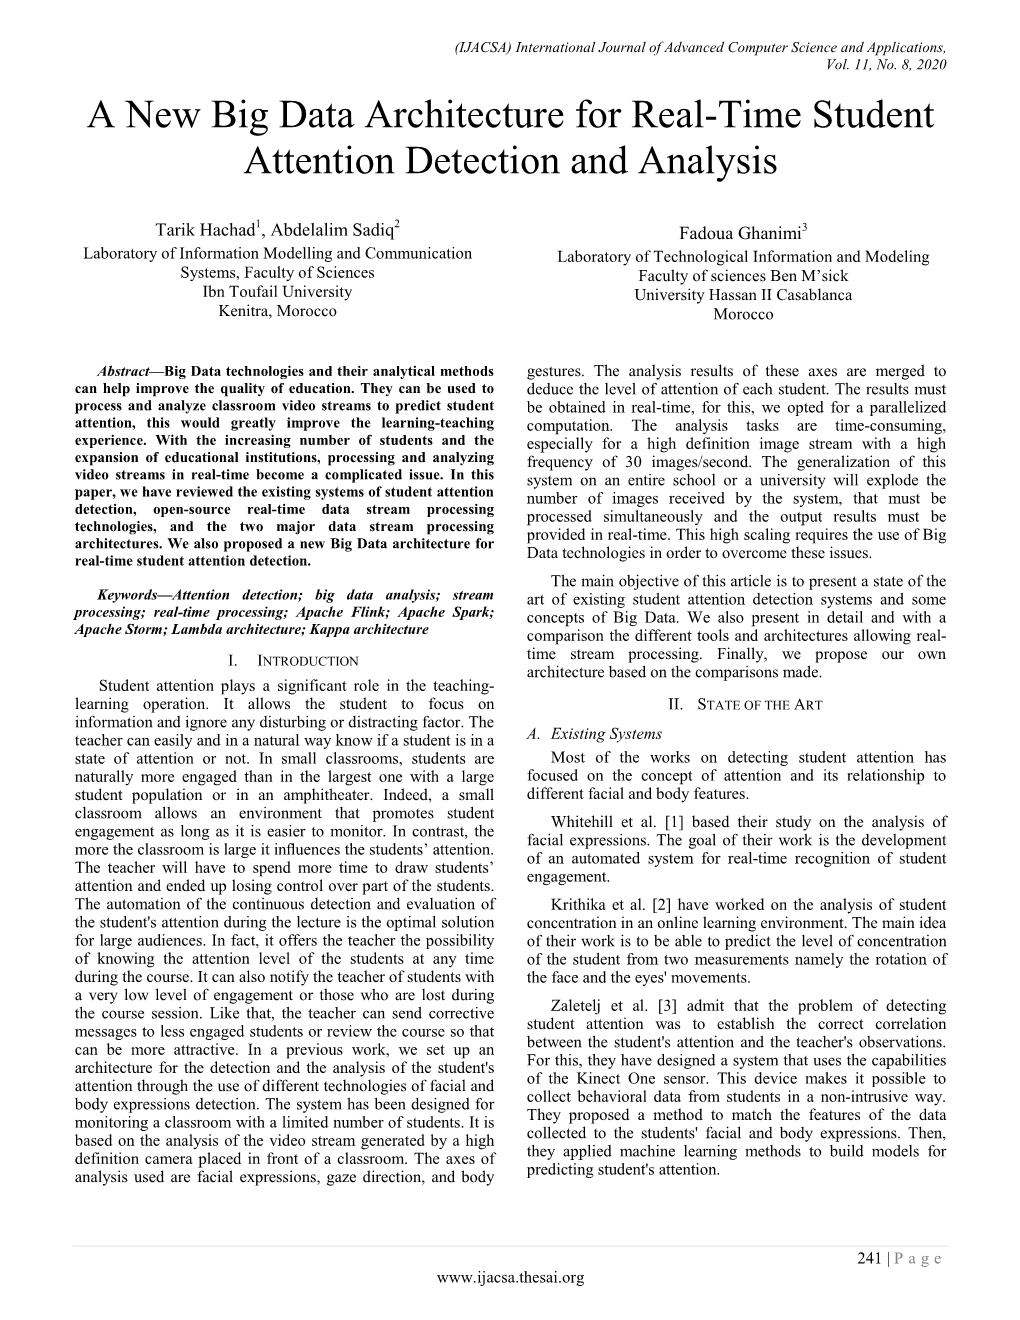 A New Big Data Architecture for Real-Time Student Attention Detection and Analysis